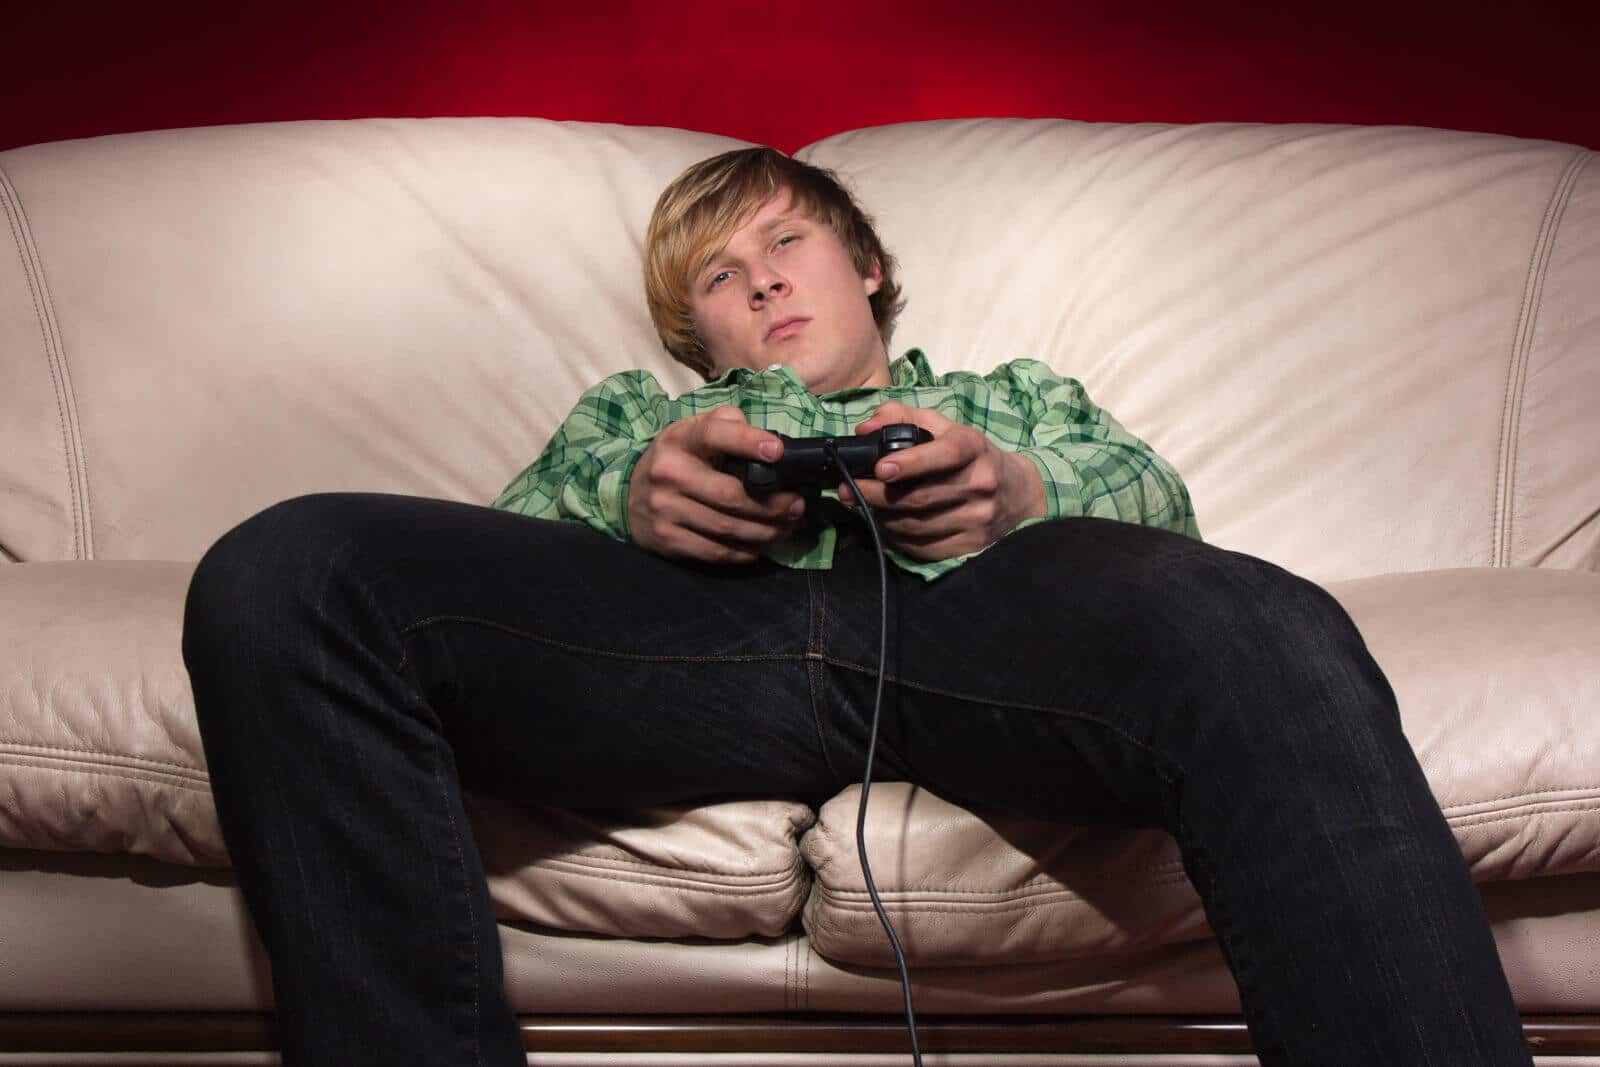 Video Games, Teen Boys and Building Social Skills and Friendships